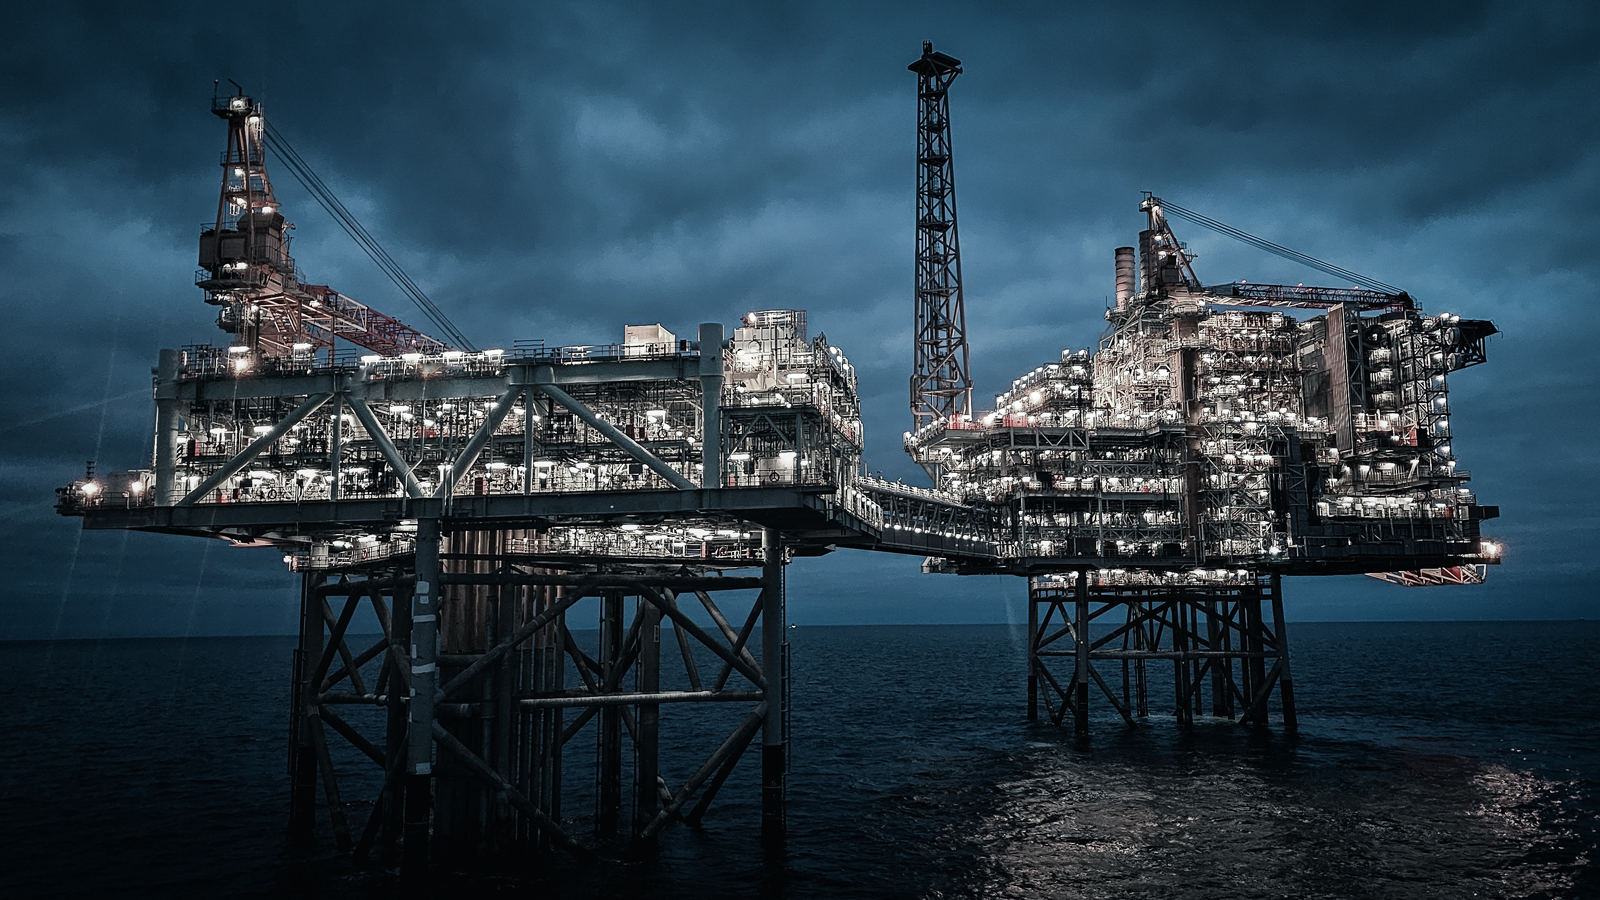 North Sea oil and gas operators must keep on track with emission cuts, says industry regulator